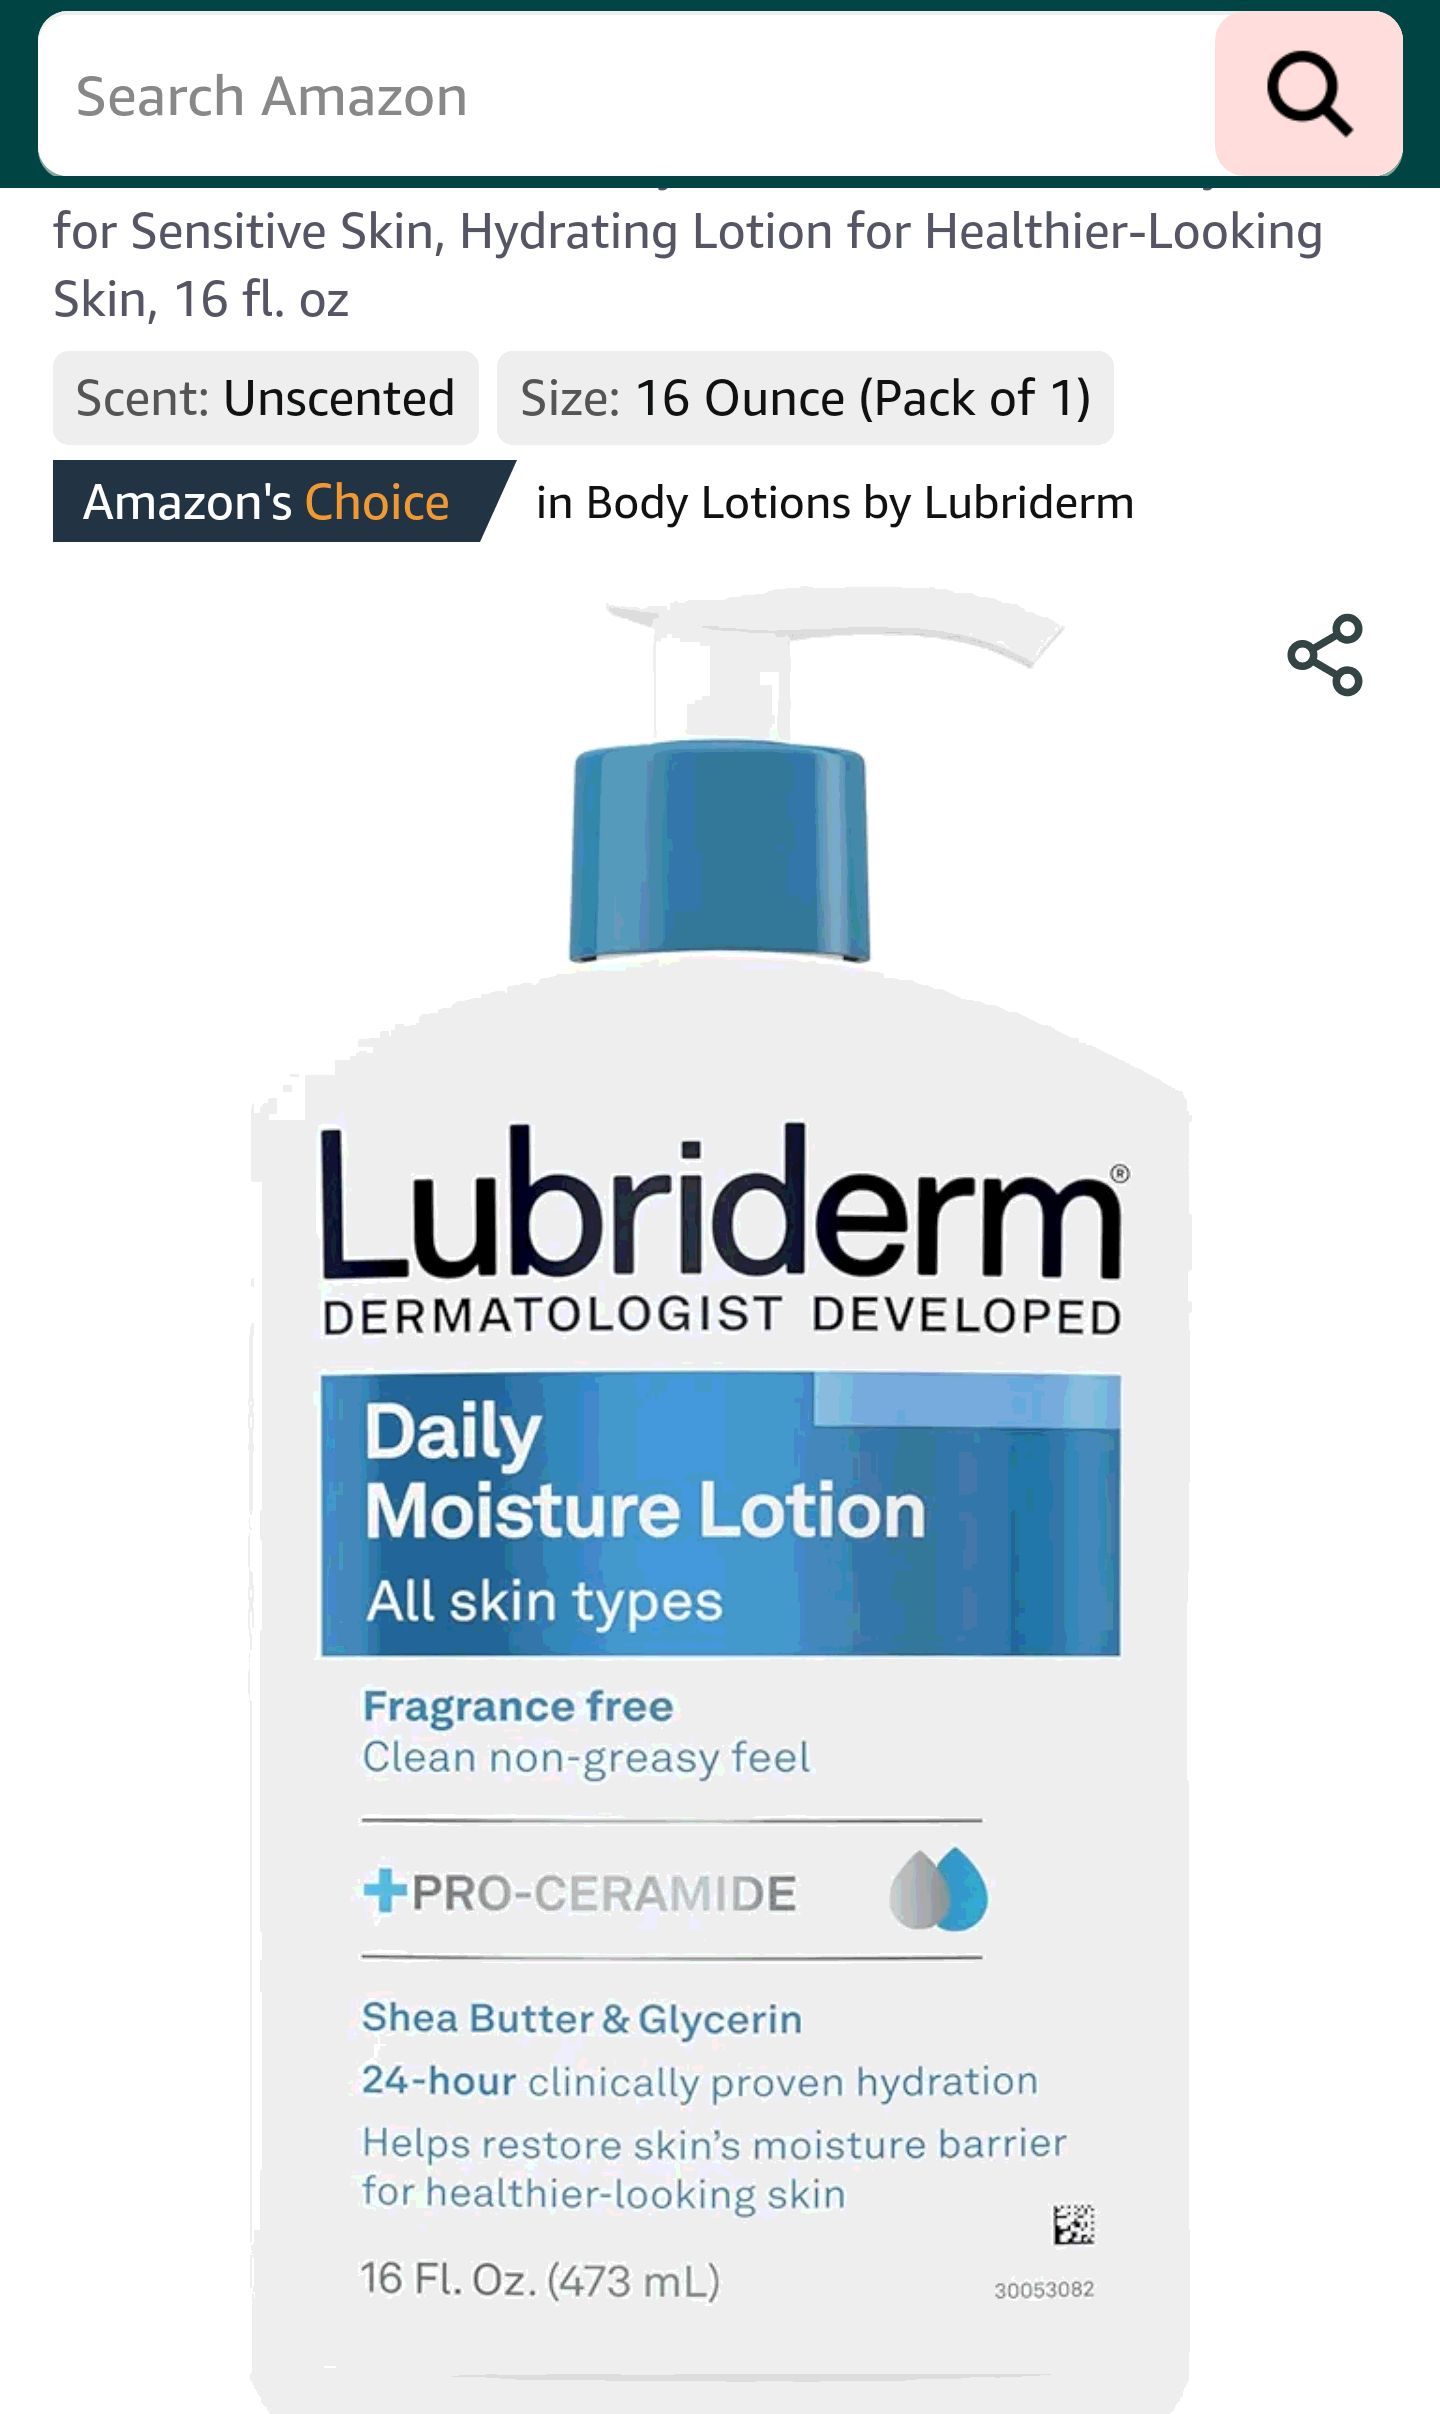 Amazon.com : Lubriderm Fragrance Free Daily Moisture Lotion + Pro-Ceramide, Shea Butter & Glycerin, Face, Hand & Body Lotion for Sensitive Skin, Hydrating Lotion for Healthier-Looking Skin, 16 fl. oz 